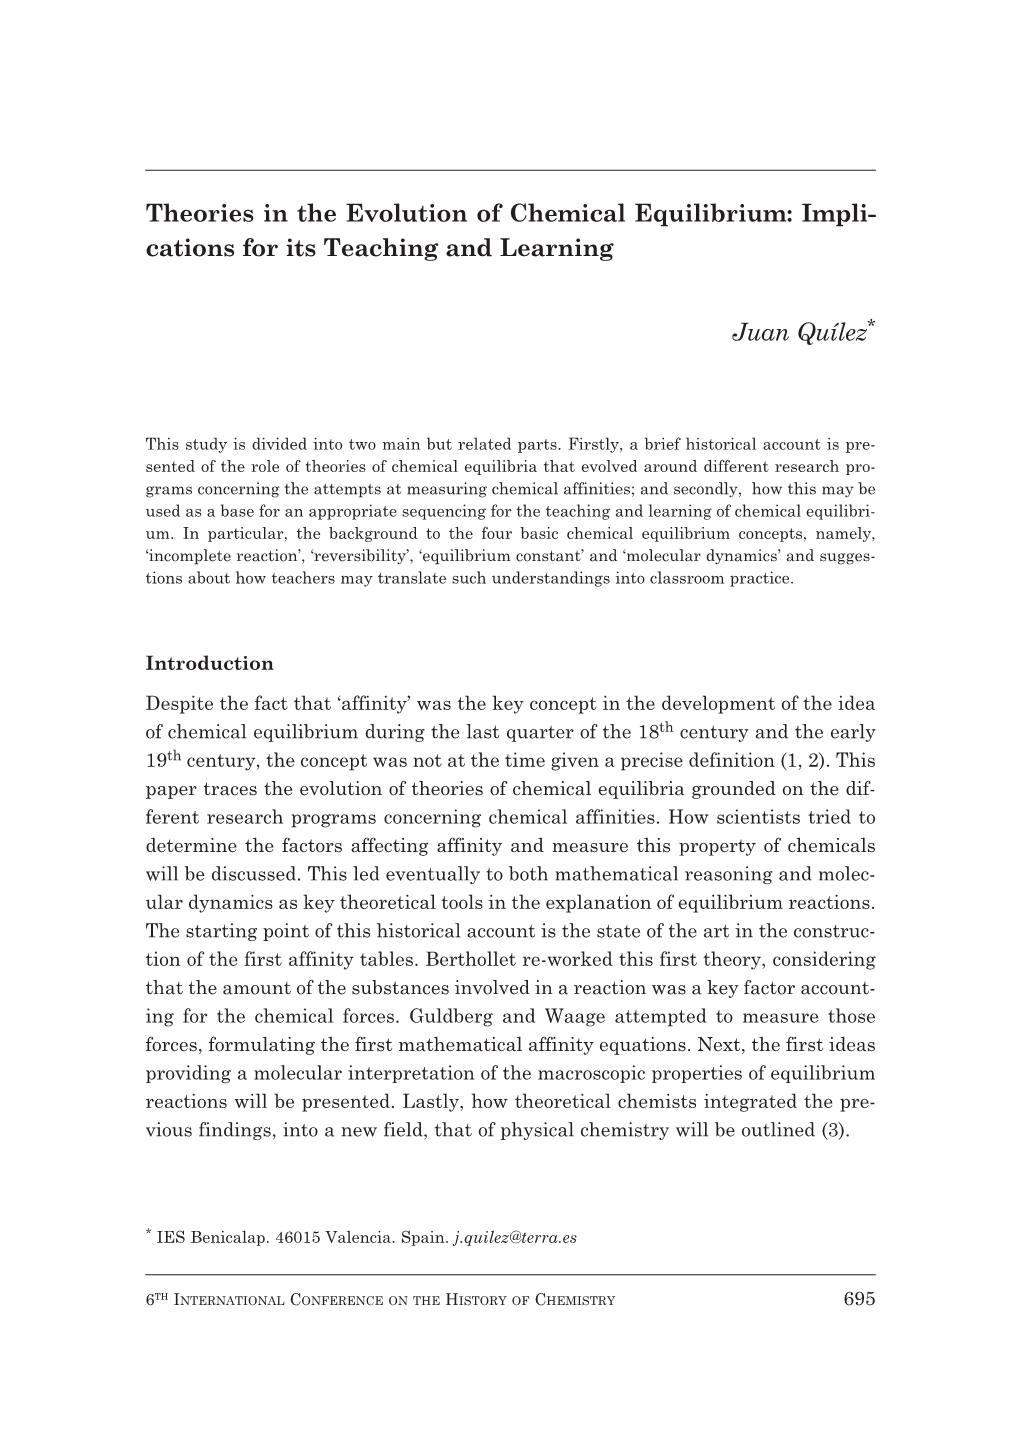 Theories in the Evolution of Chemical Equilibrium: Impli- Cations for Its Teaching and Learning